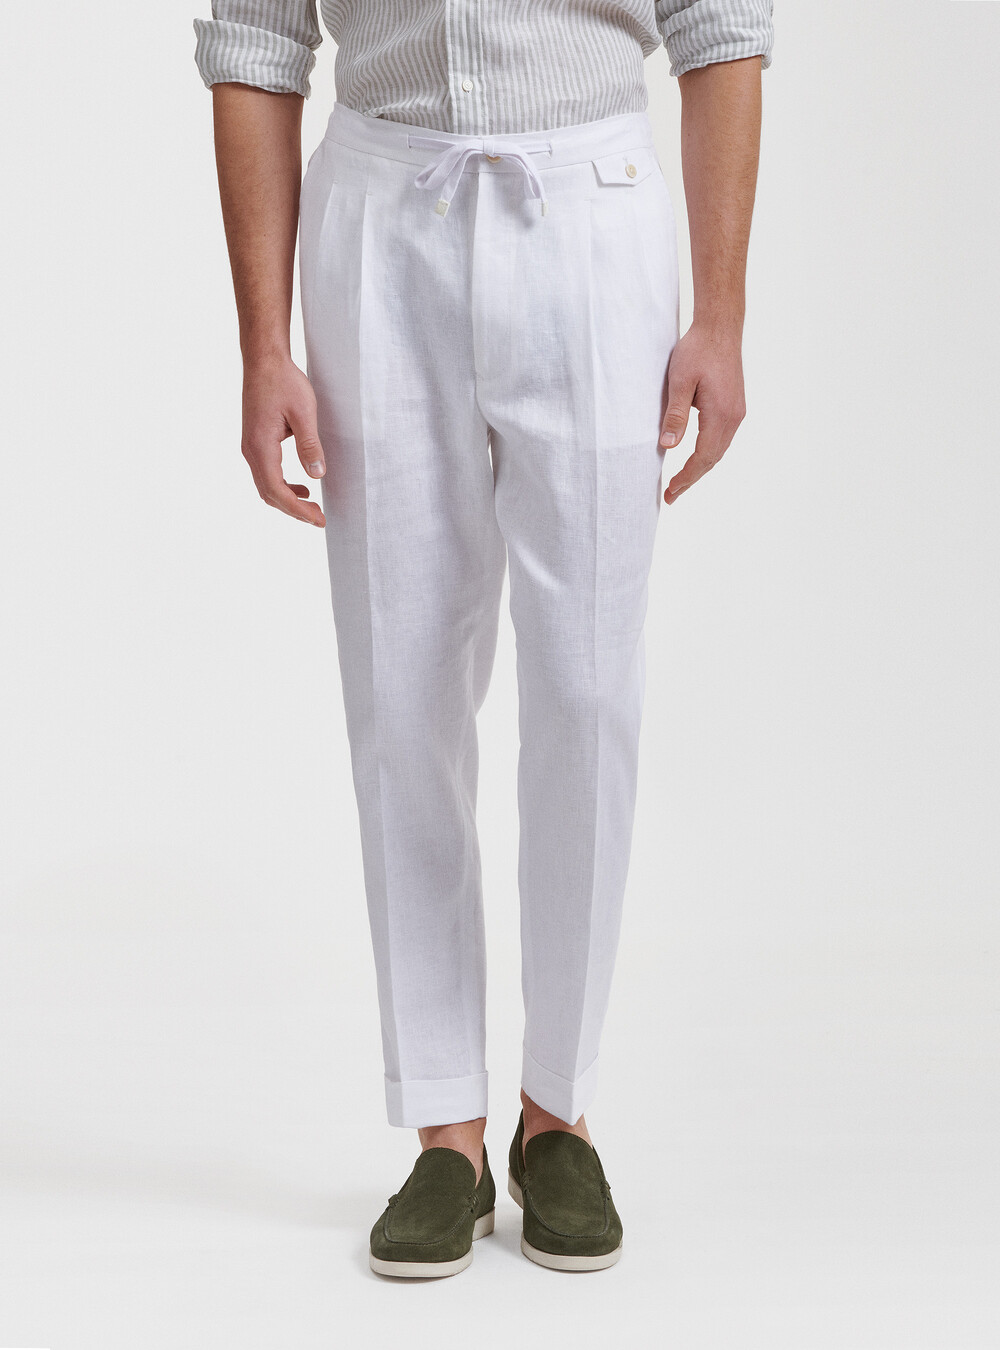 Linen pleated and drawstring trousers | GutteridgeUS | Trousers Uomo